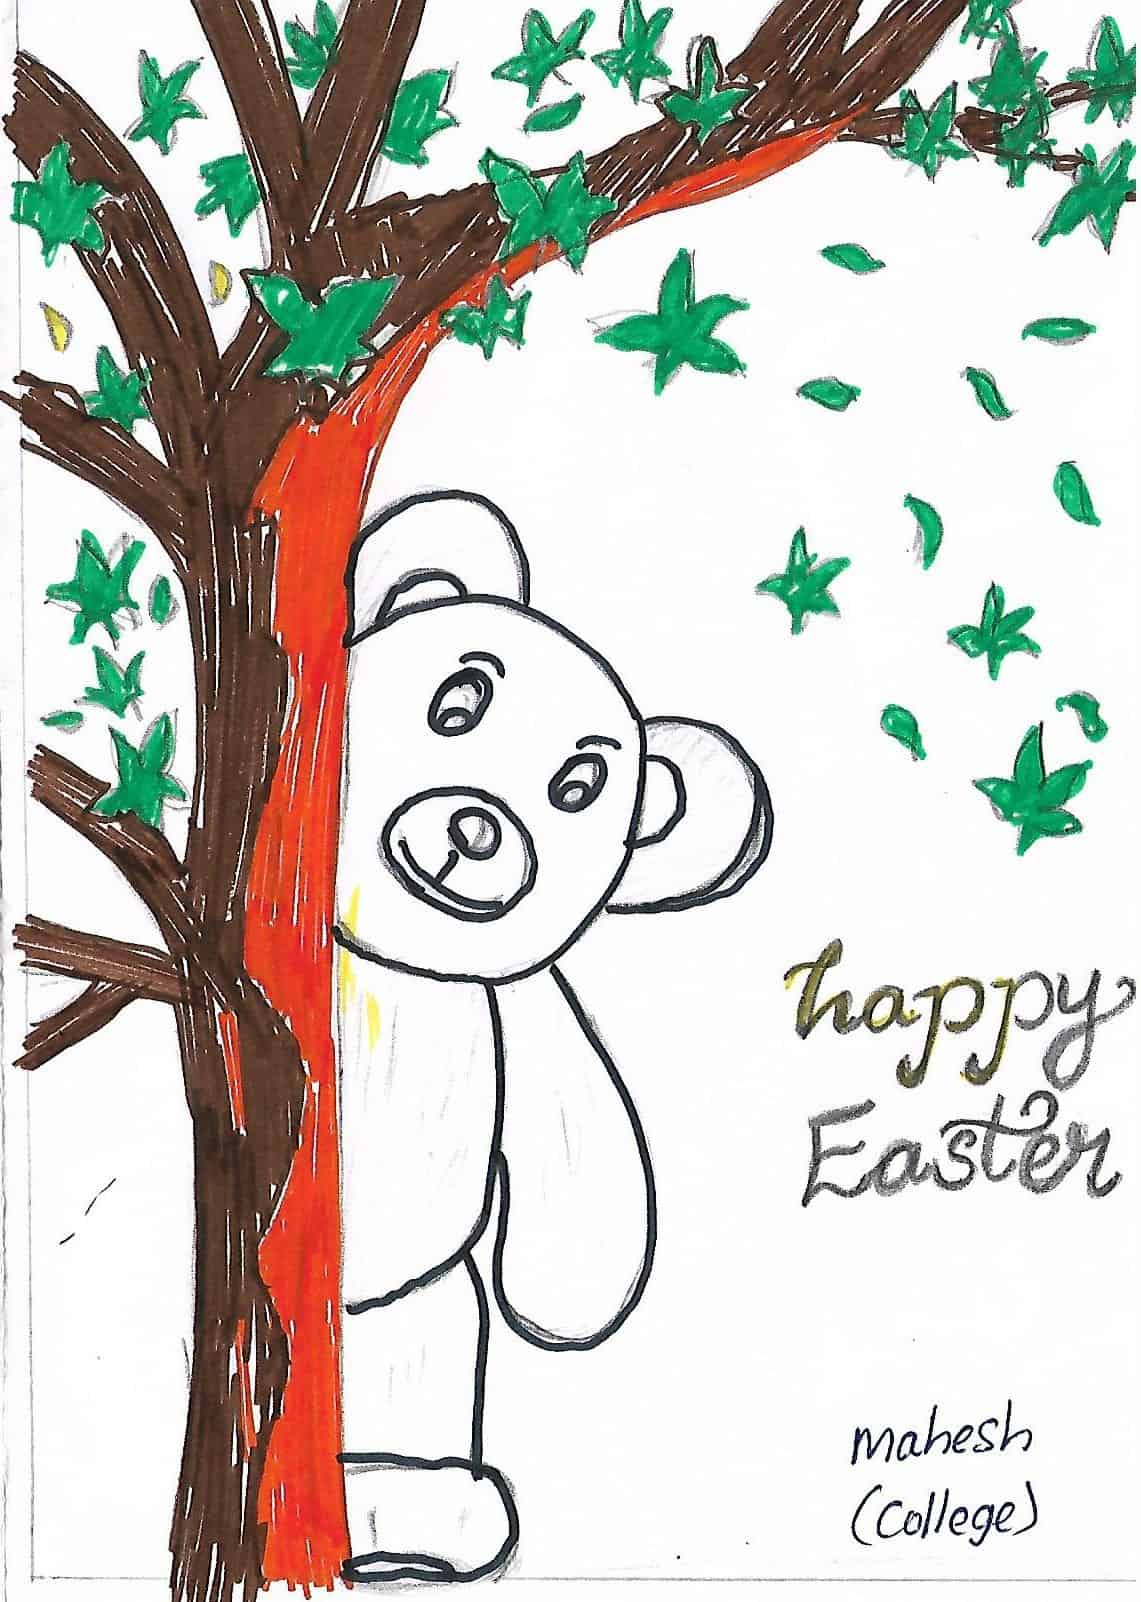 An Indian college student's Easter greeting card